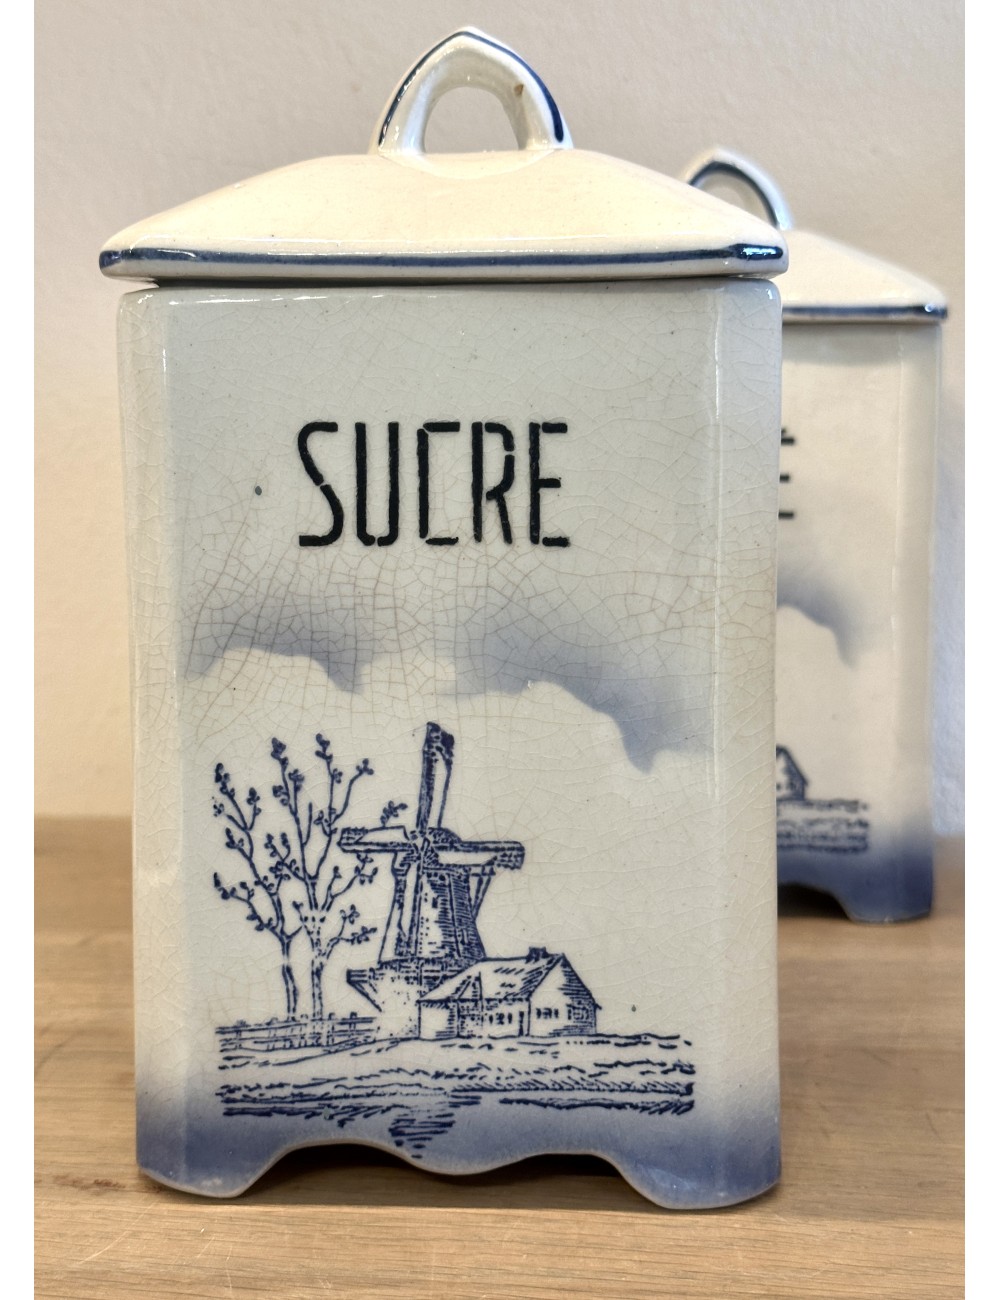 Storage jar - unmarked - décor in blue/white of a mill, house and trees - inscription SUCRE